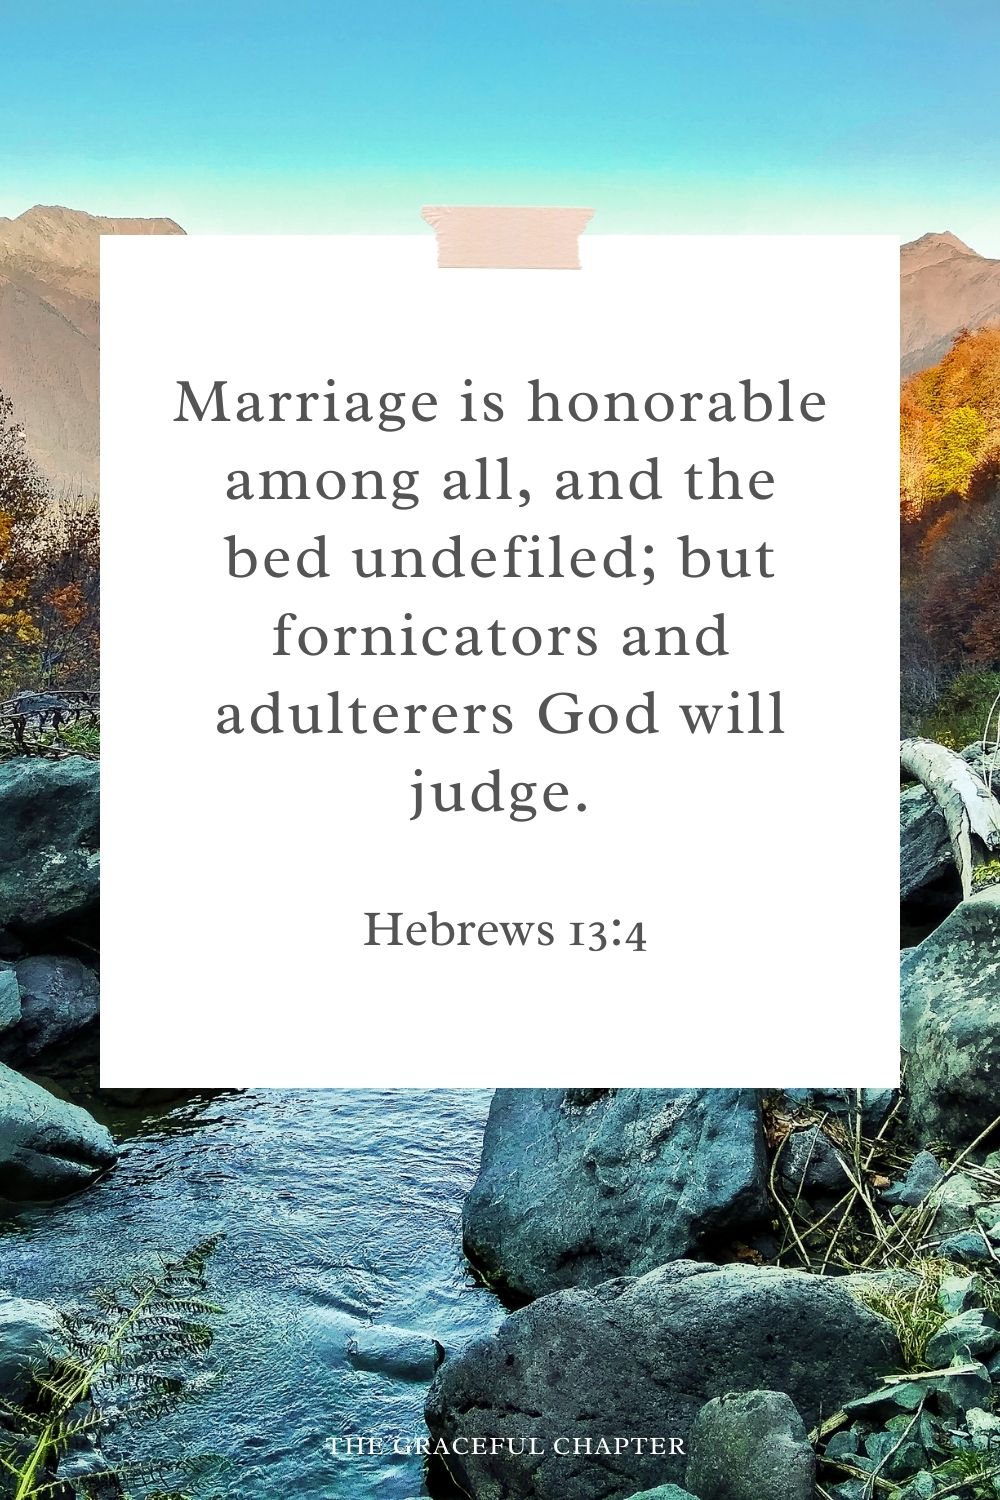 Marriage is honorable among all, and the bed undefiled; but fornicators and adulterers God will judge. Hebrews 13:4